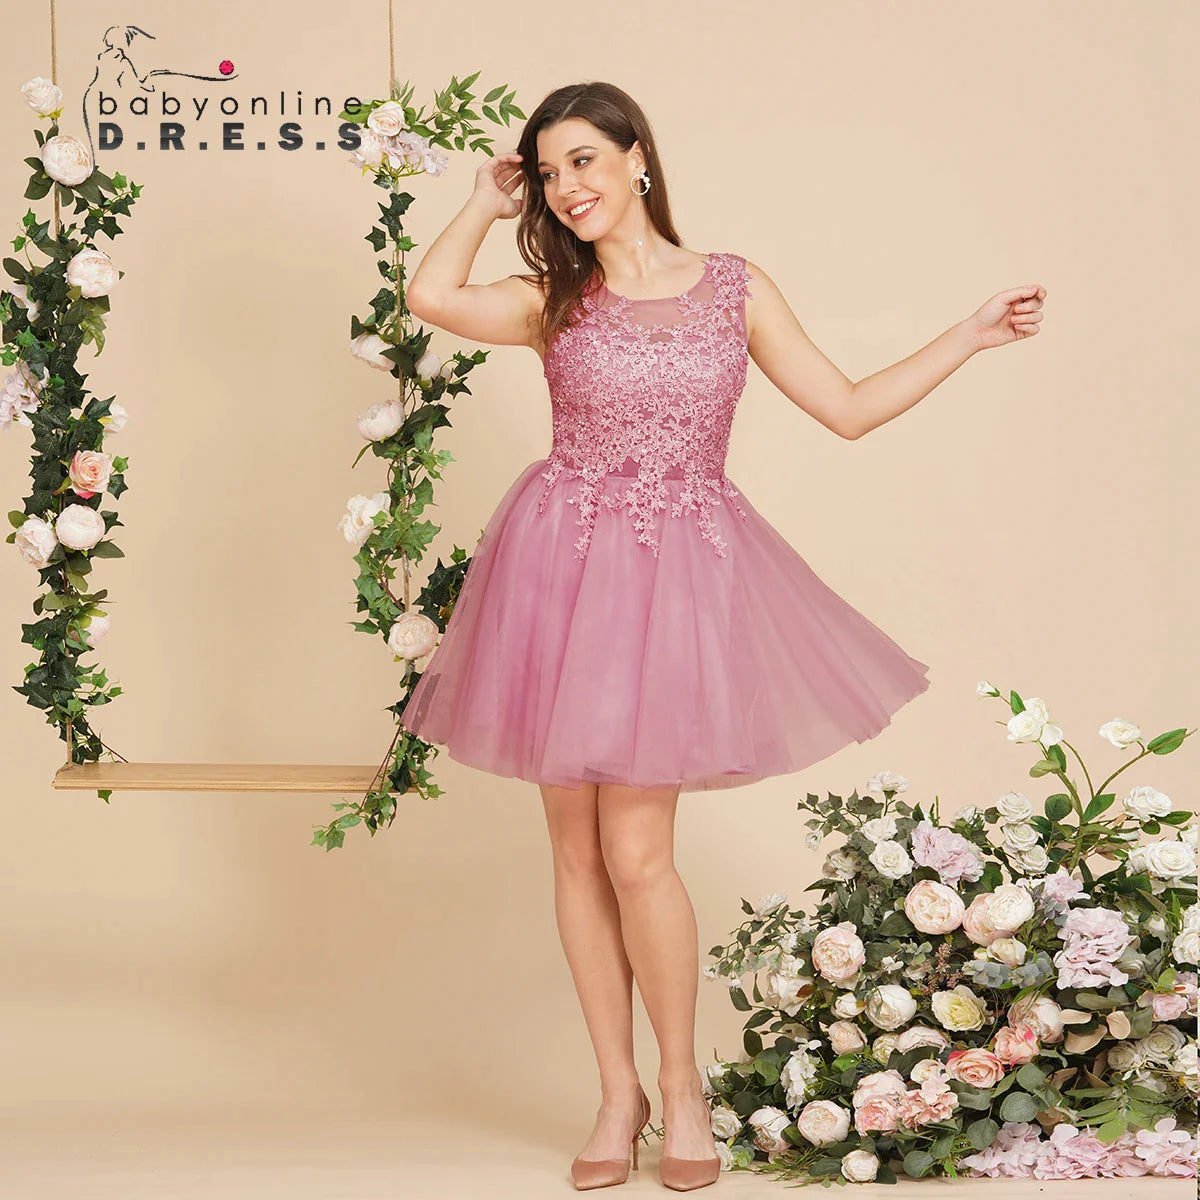 Short Homecoming Dress Illusion Neckline Sleeveless Floral Appqulies Evening Dress With Integrated Cup Chiffon Skirt